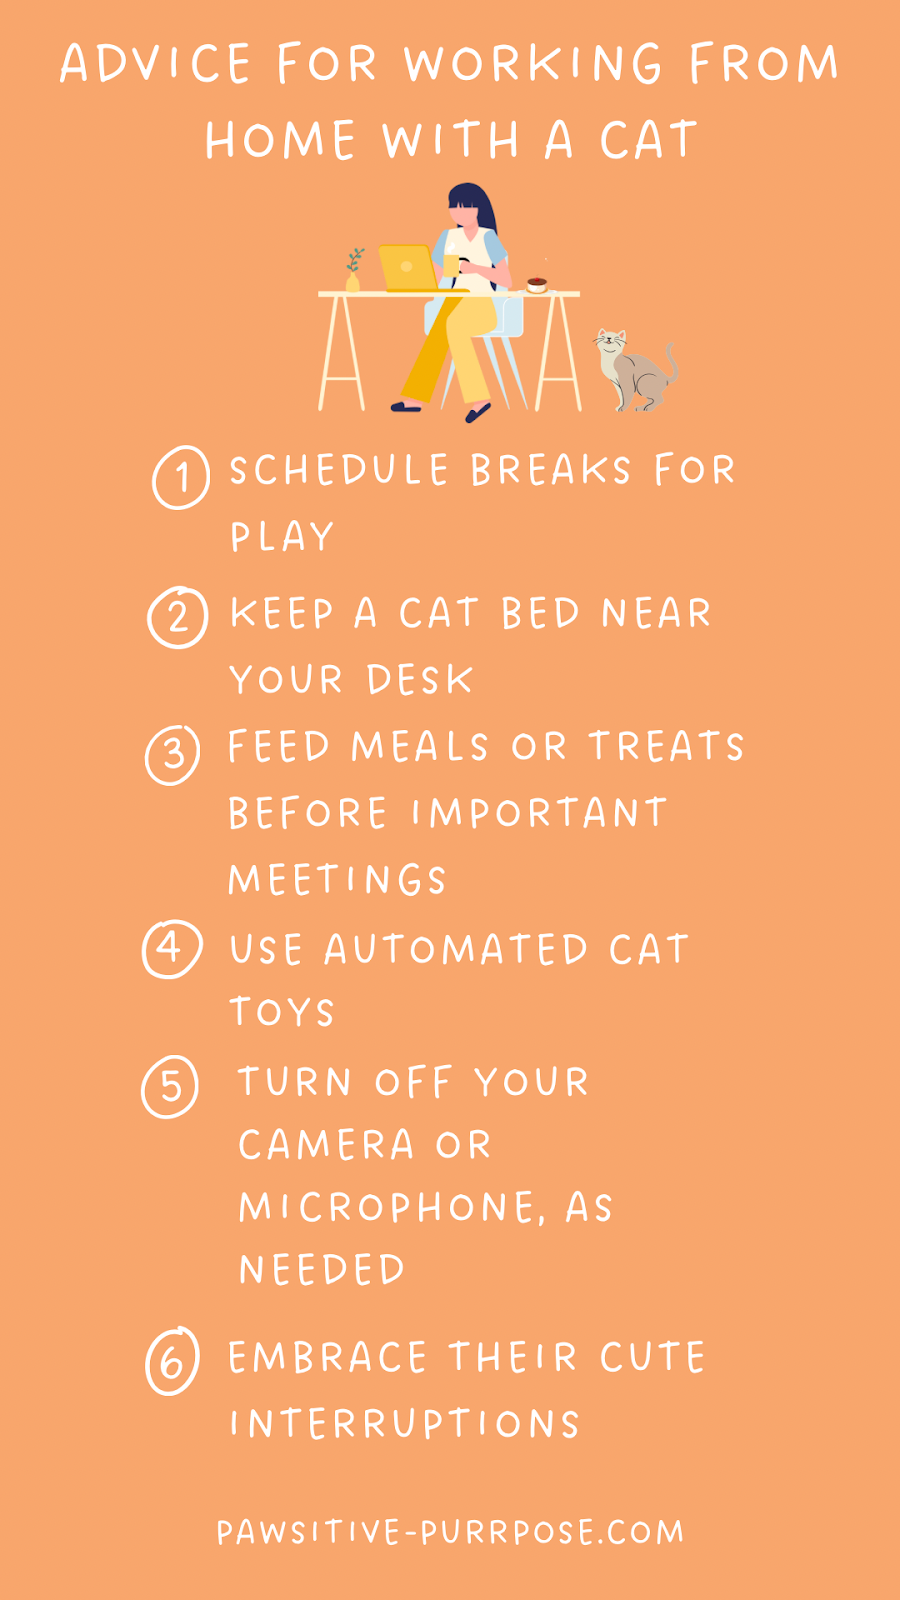 List of advice for working from home with a cat or pet as a remote employee